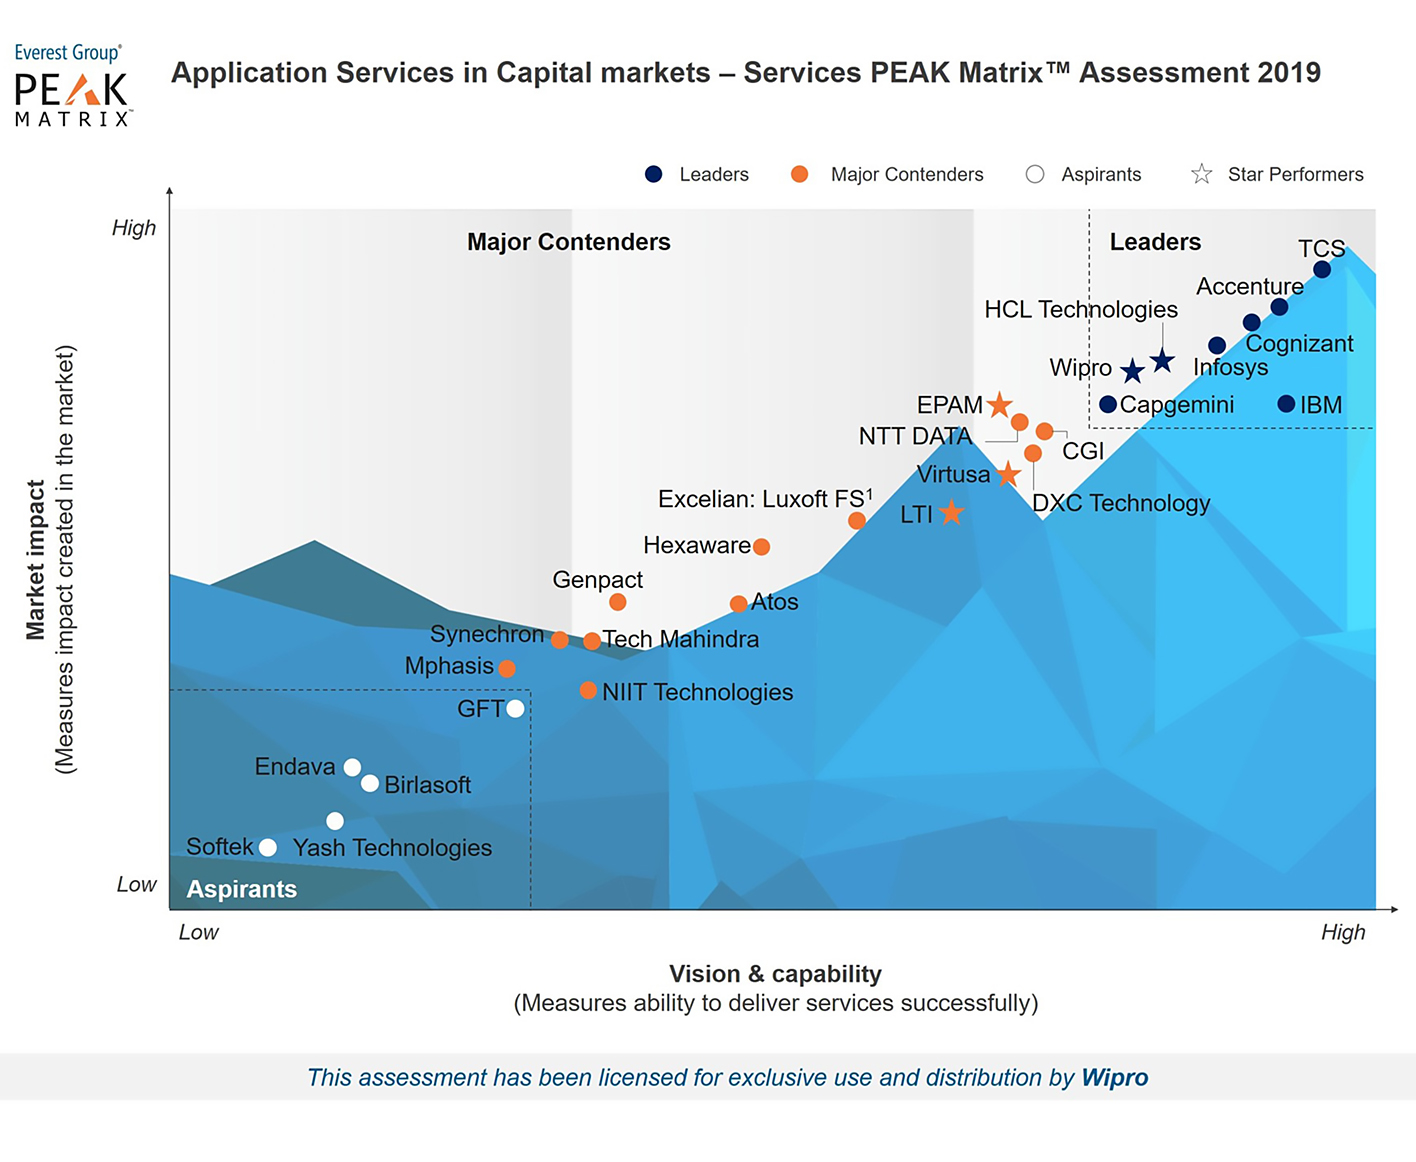 Wipro is a Leader and Star Performer in Everest Group's PEAK Matrix™ Assessment 2019 for Application Services in Capital Markets